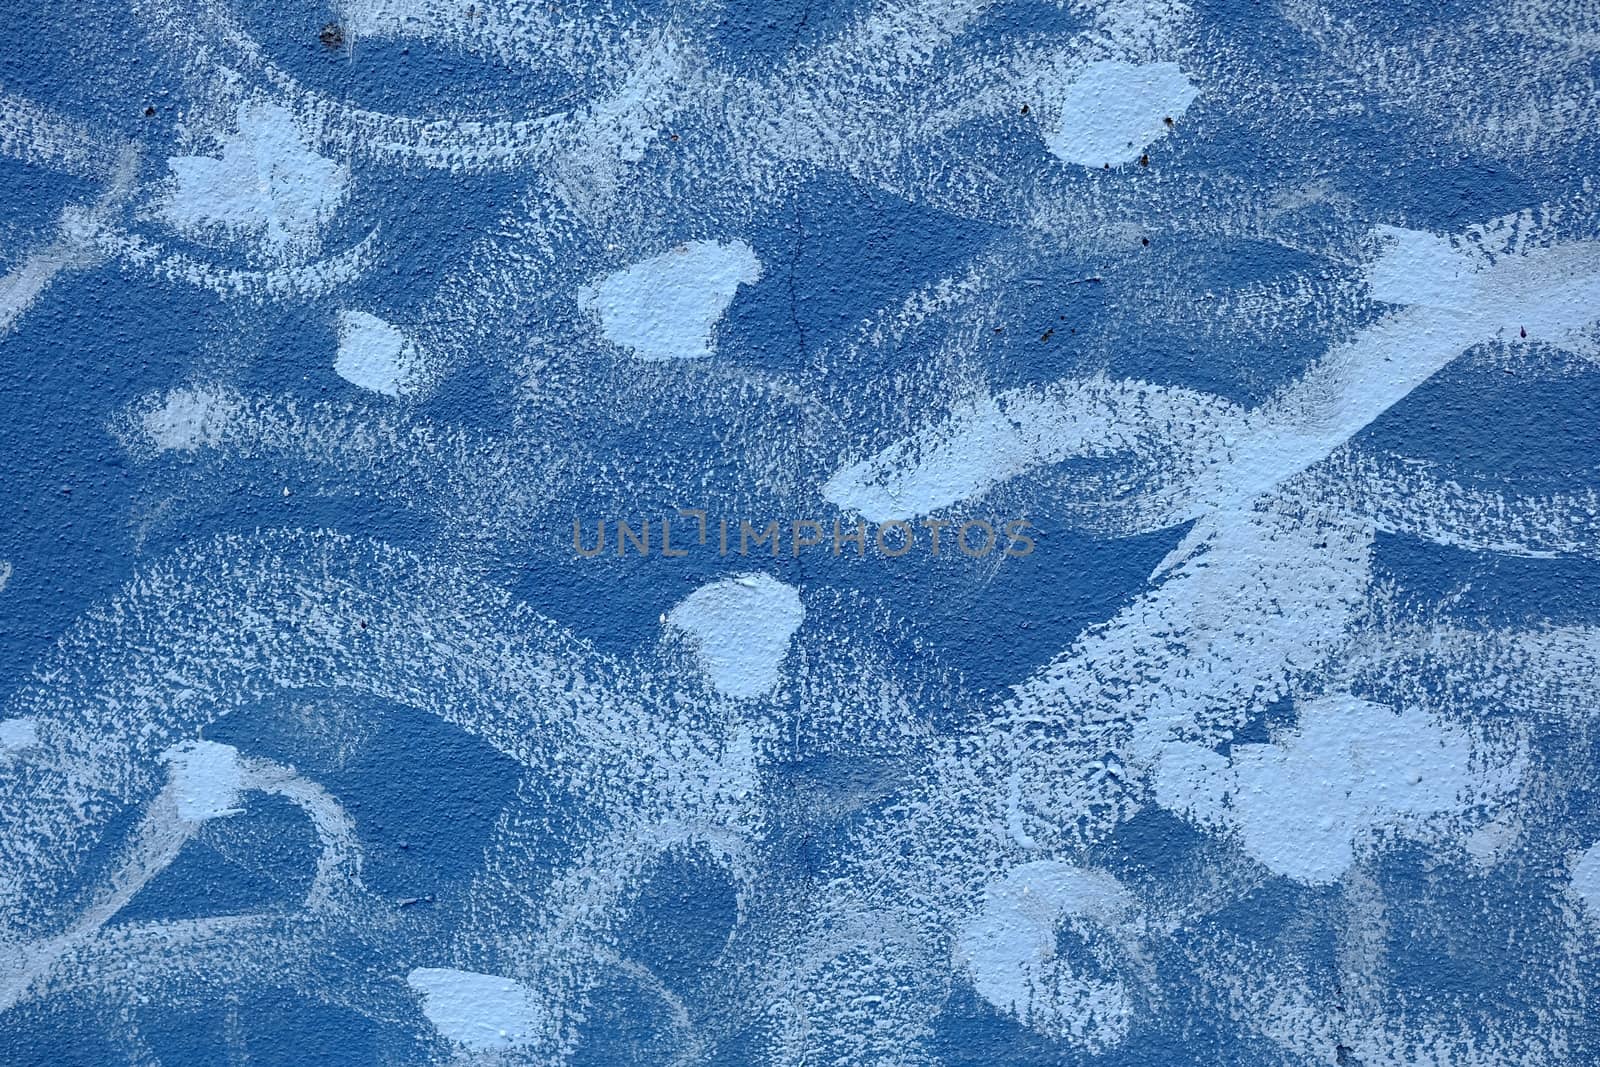 Unfinished White Painting on Grunge Blue Concrete Wall Texture Background.